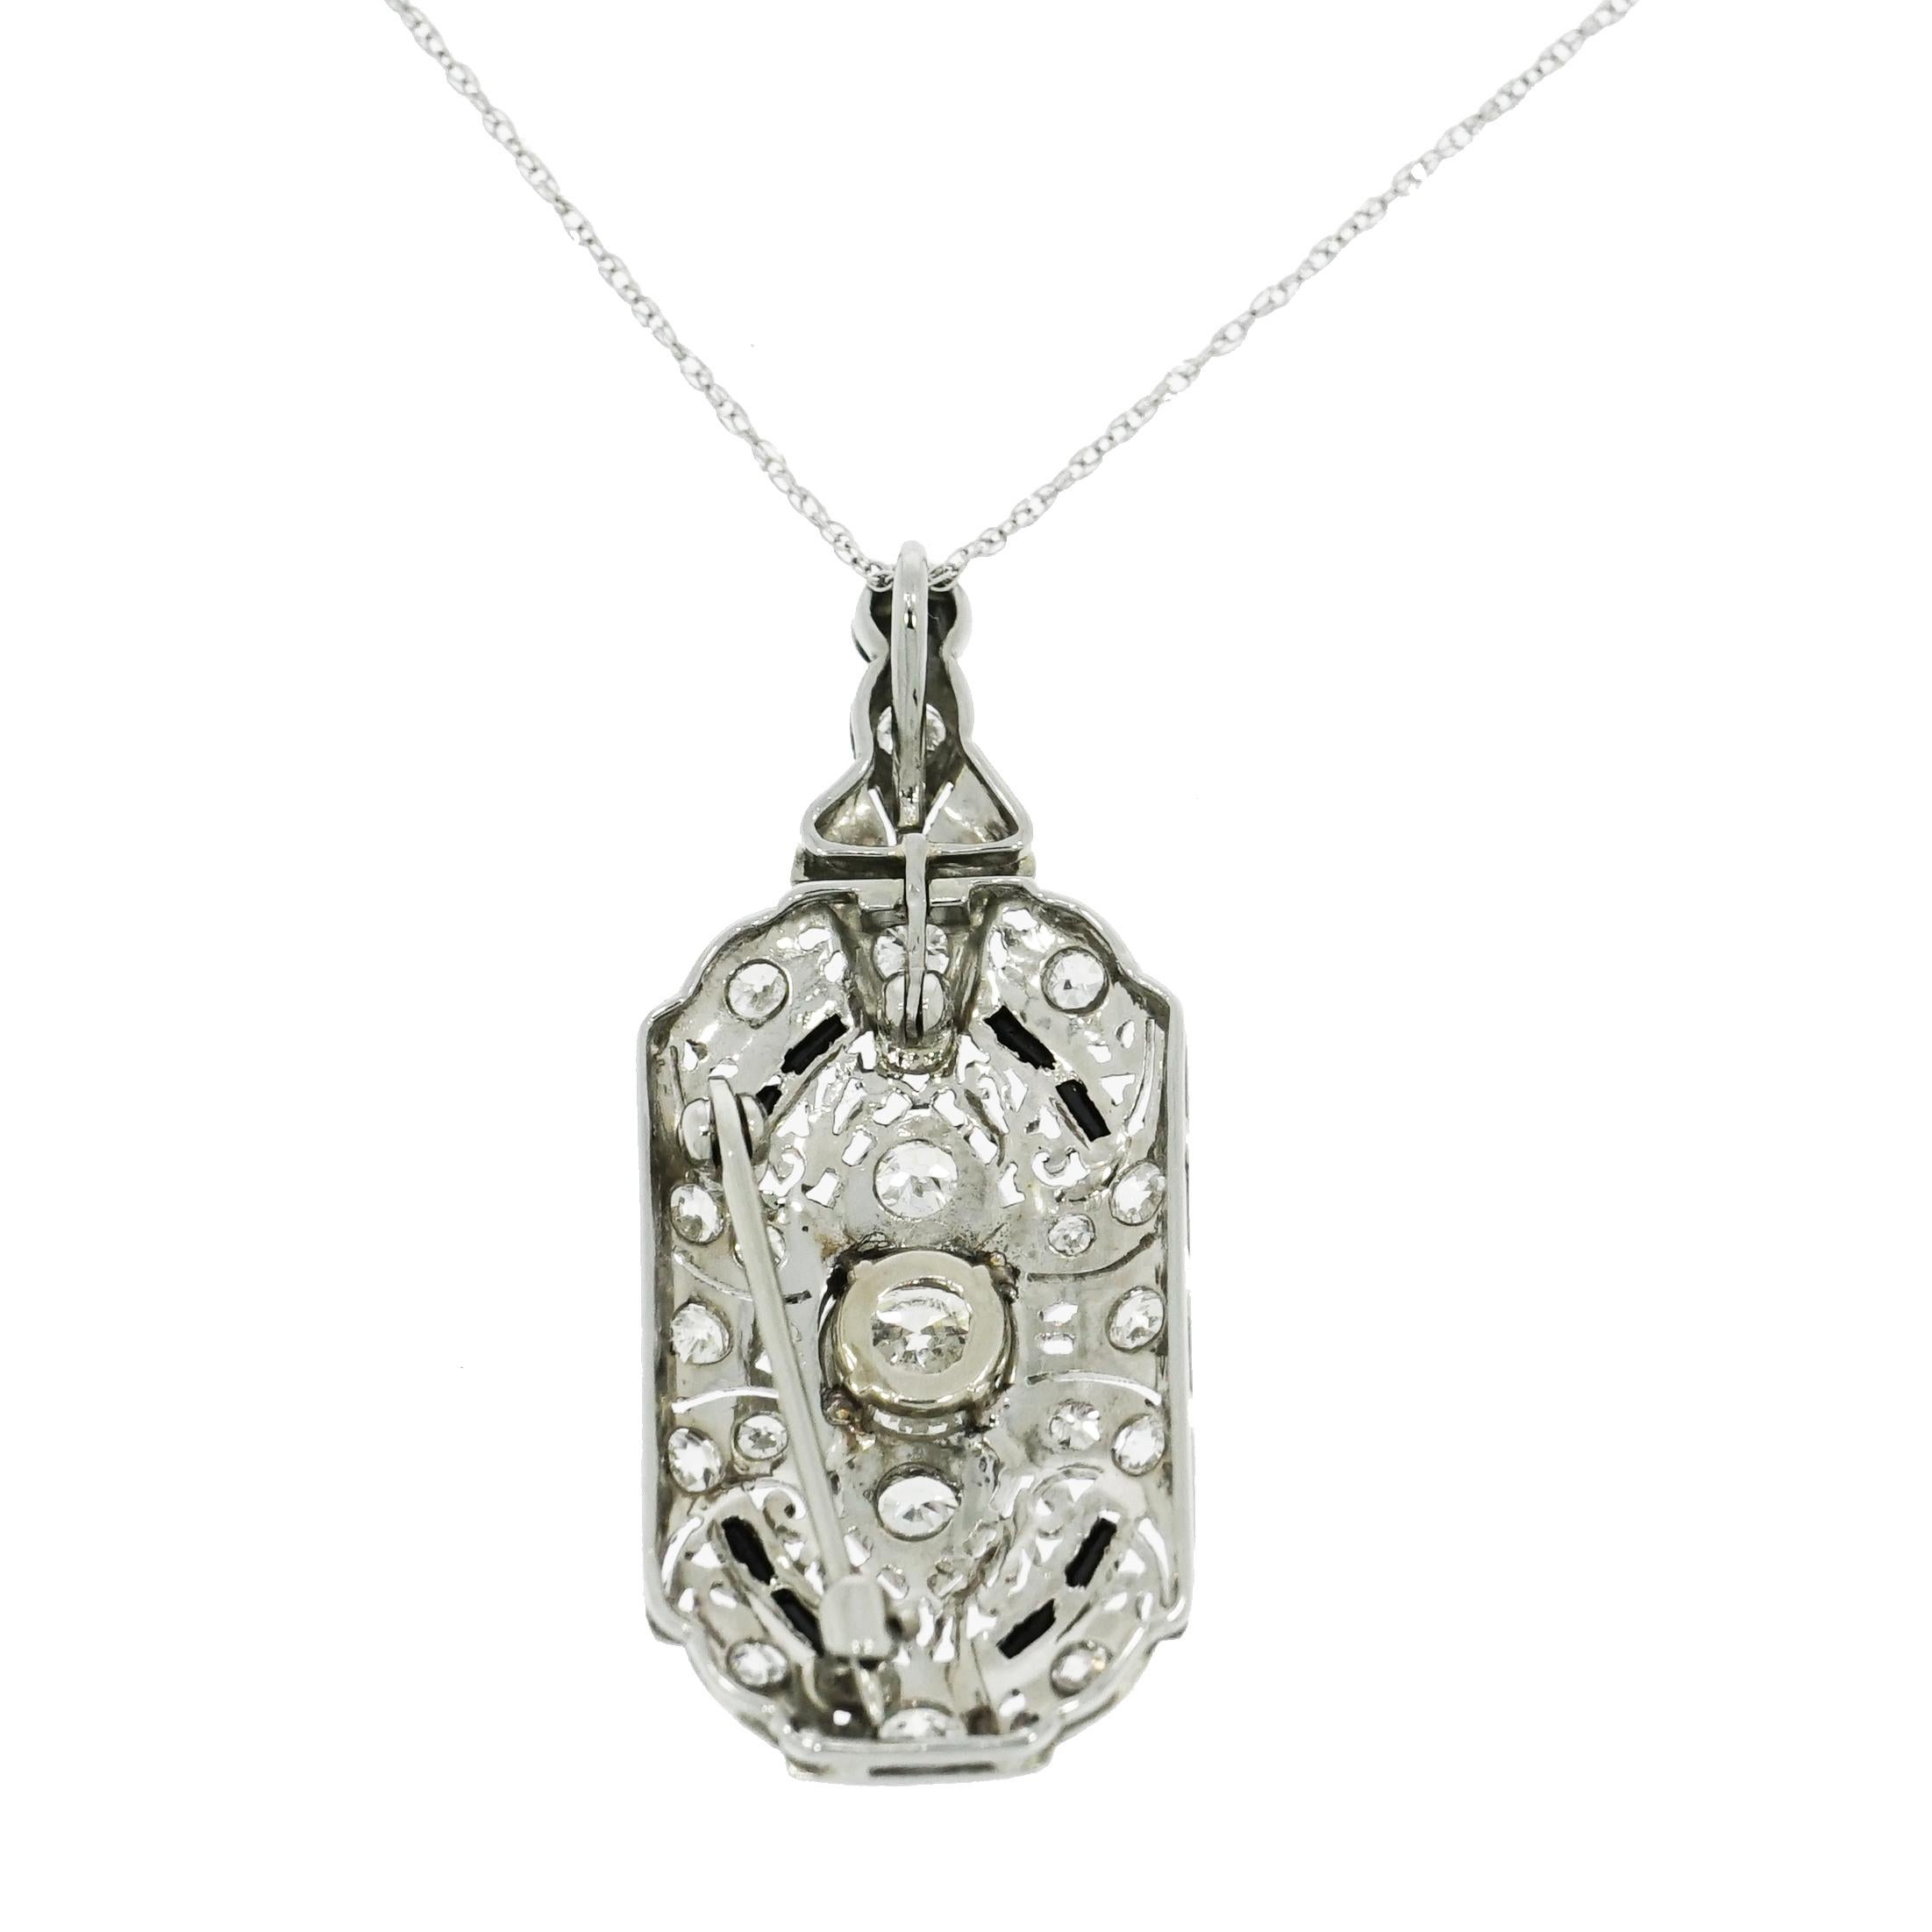 This gorgeous platinum brooch/pendant in the Art Deco Style, is centered with a sparkling old mine cut diamond weighing approximately 1.00ct. and smaller old mine cut diamonds weighing approximately 1.25 carats total. The diamond are graded H-I